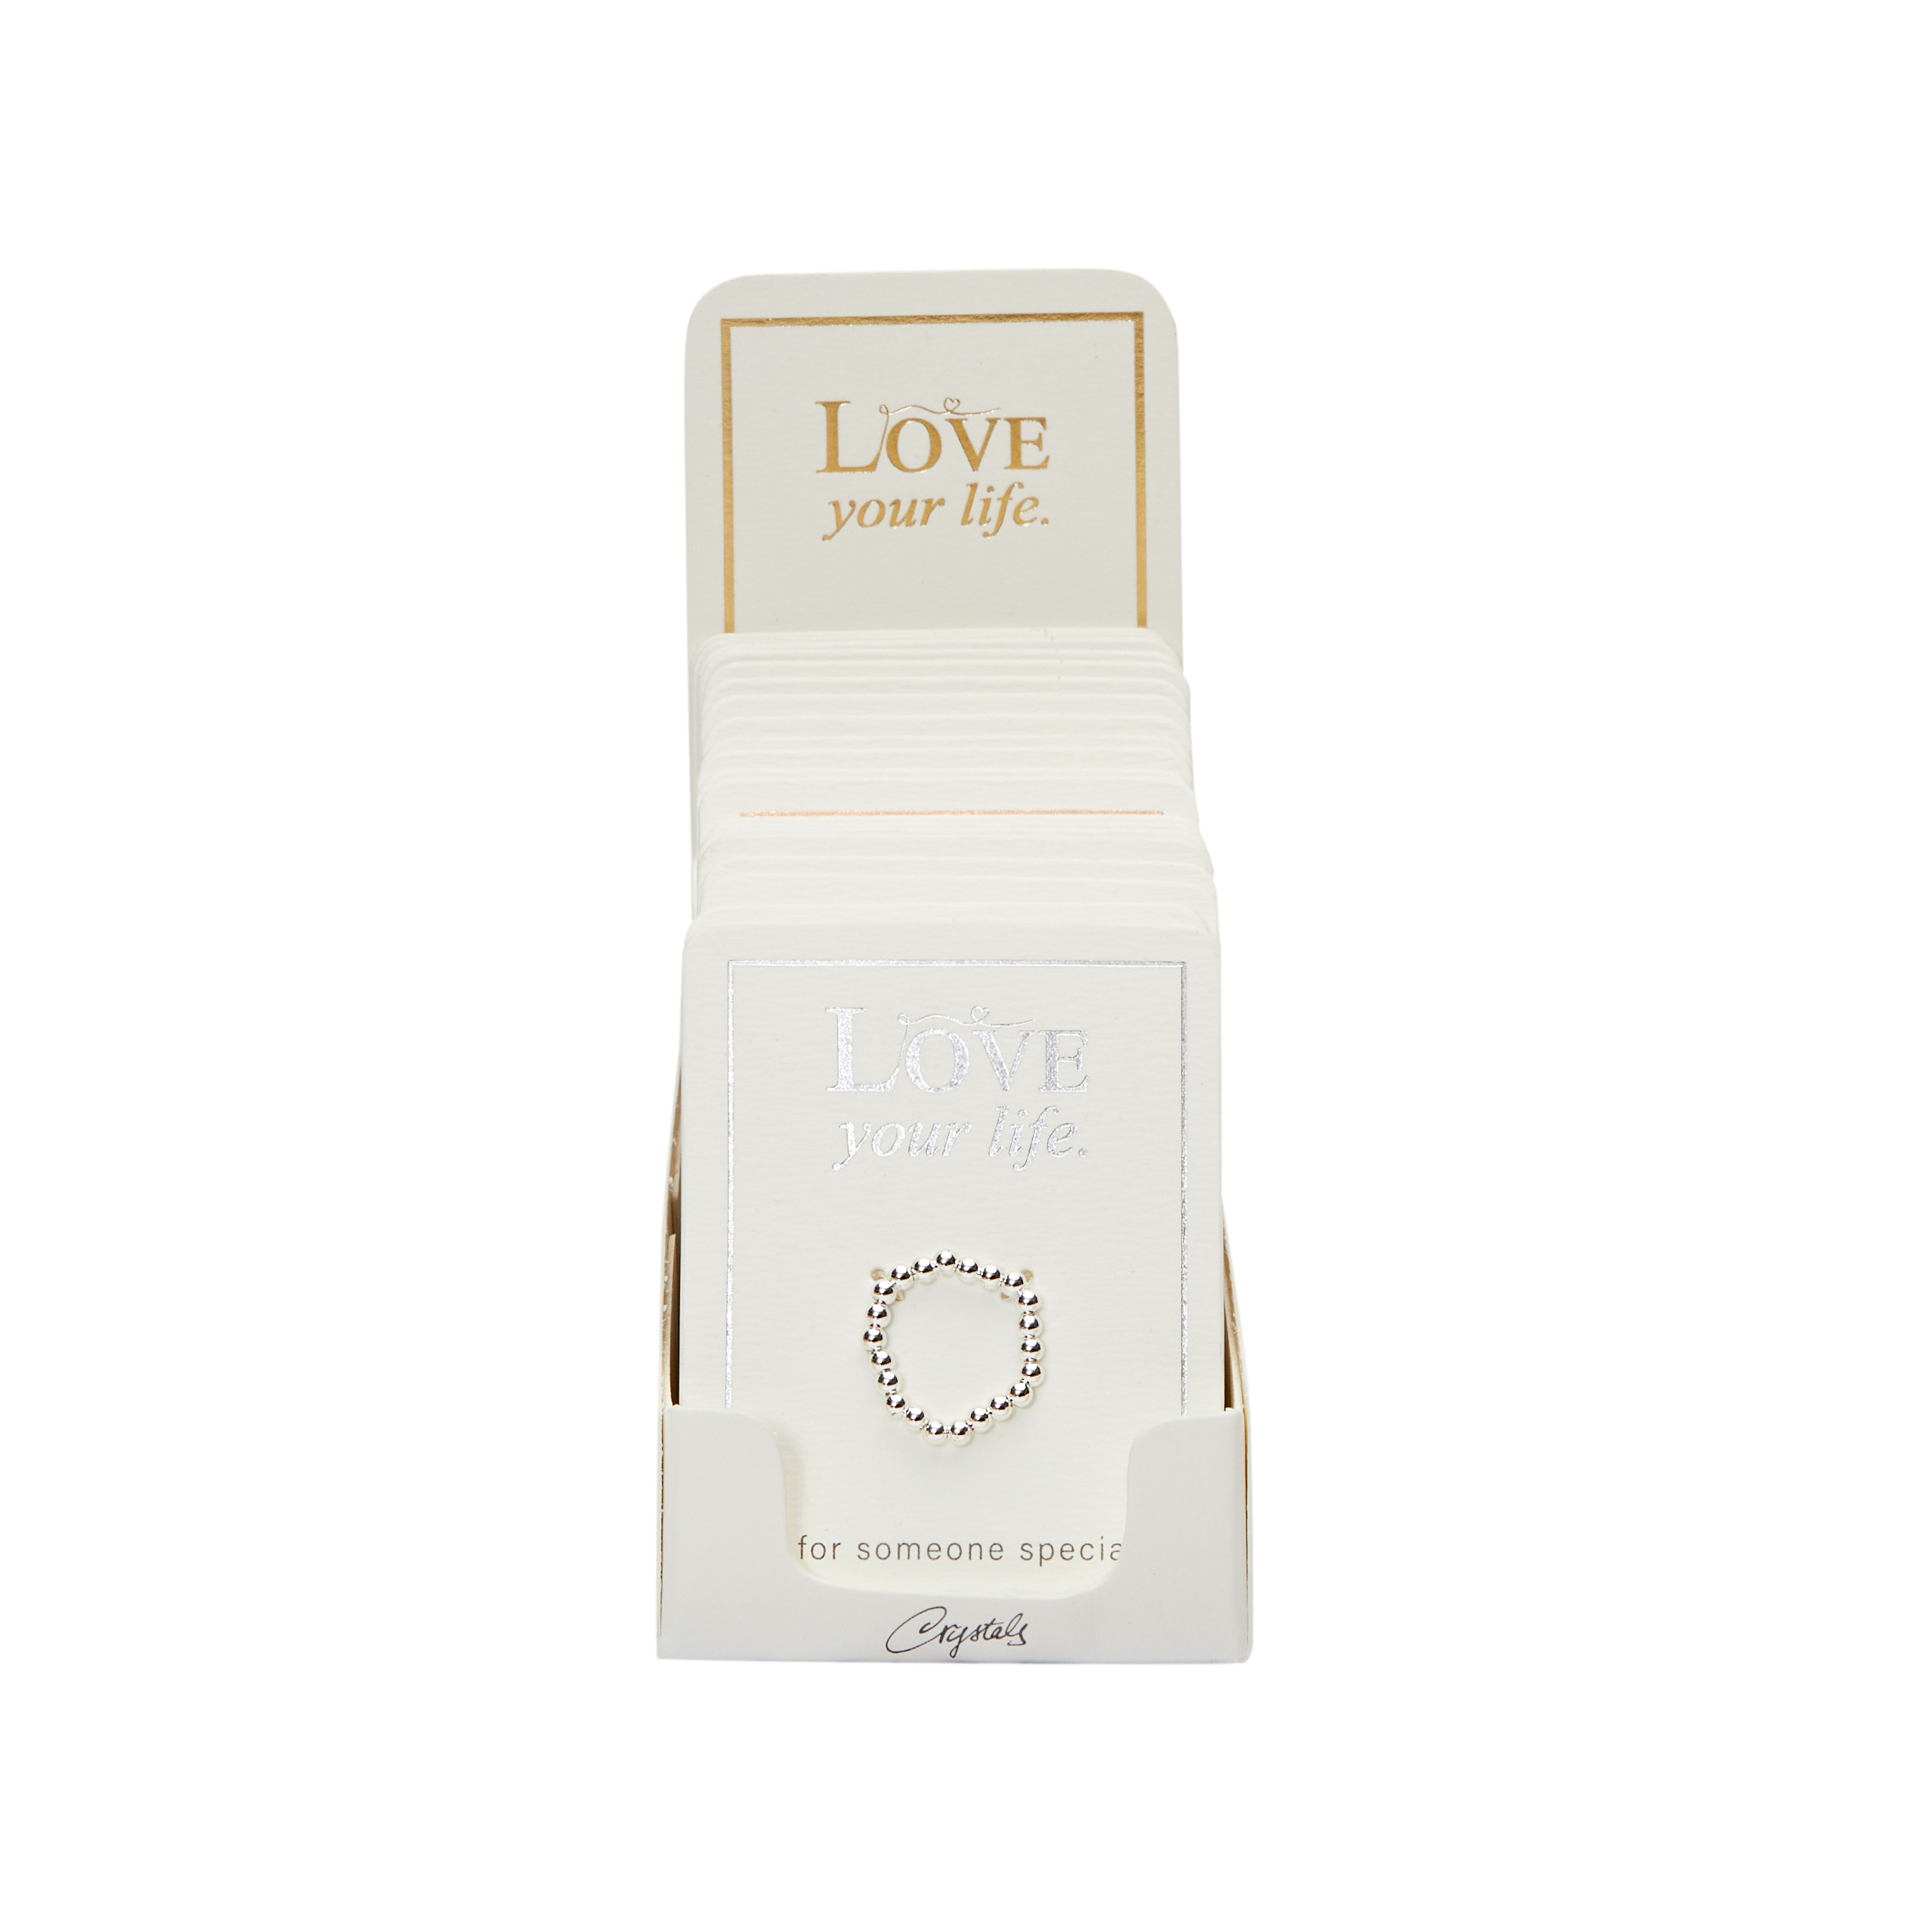 Display rings "Love your life"